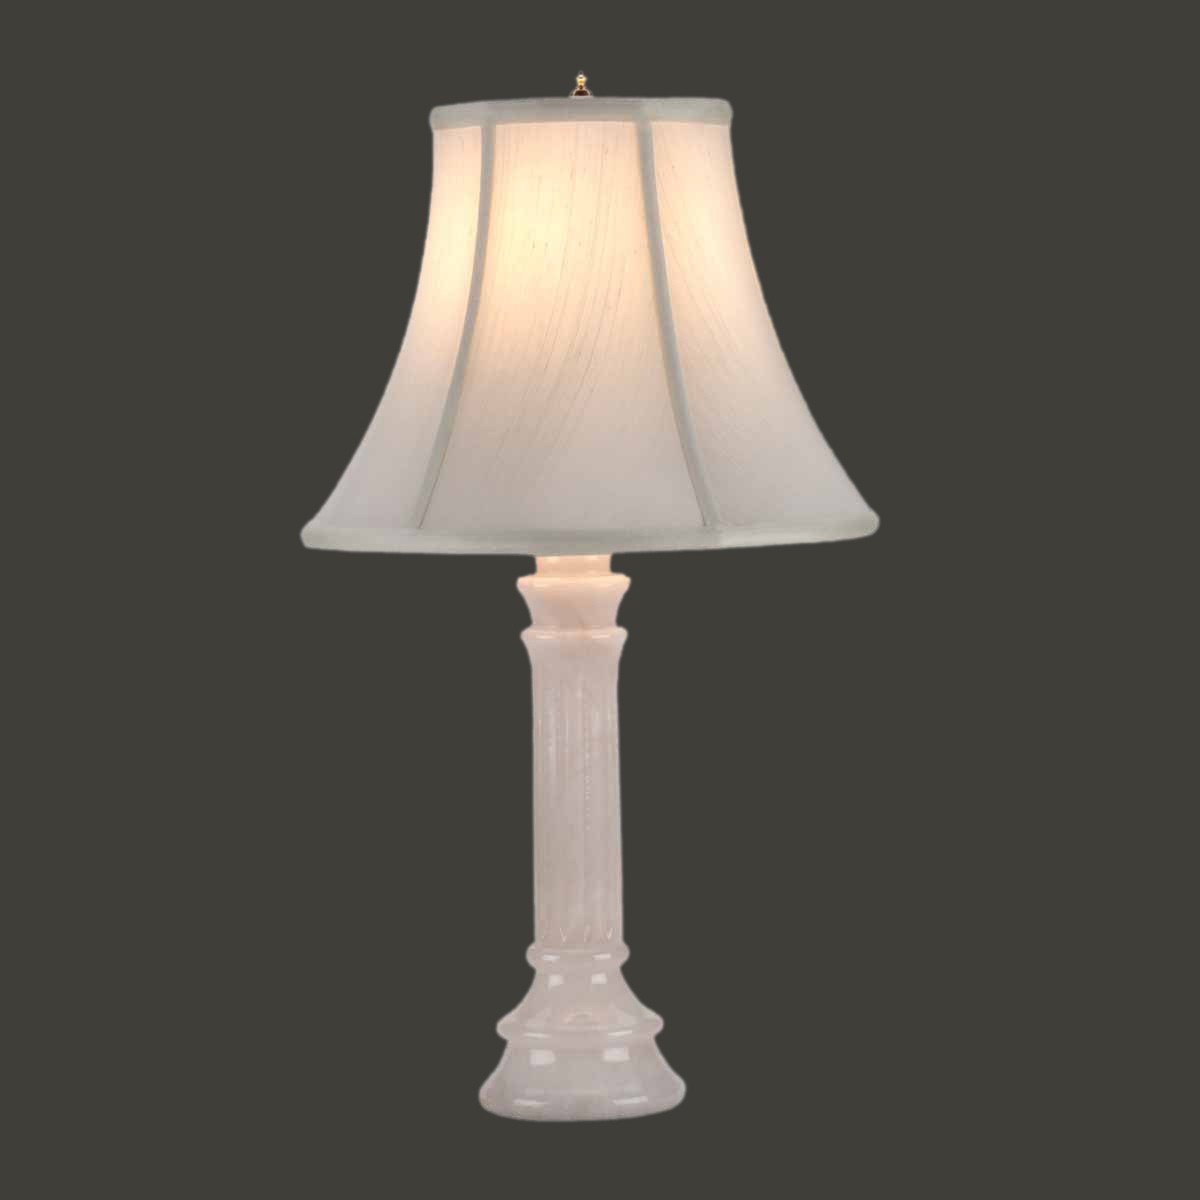 Beige shade white alabaster table lamp of 22 inch height